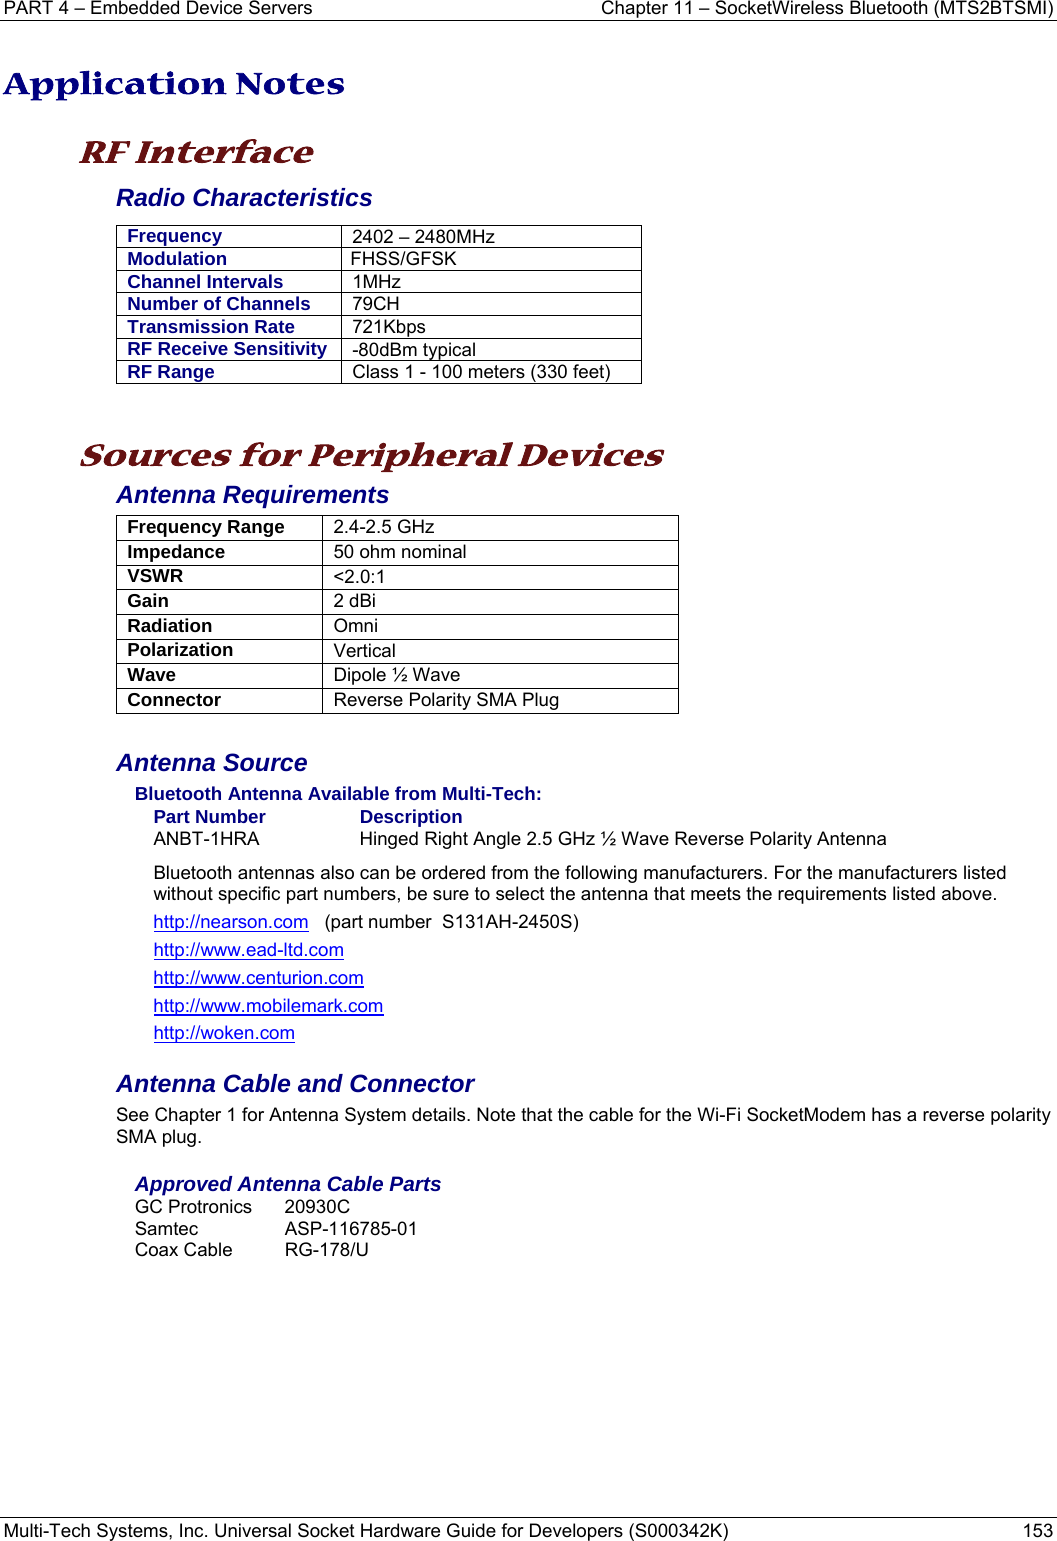 PART 4 – Embedded Device Servers  Chapter 11 – SocketWireless Bluetooth (MTS2BTSMI) Multi-Tech Systems, Inc. Universal Socket Hardware Guide for Developers (S000342K)  153  Application Notes  RF Interface Radio Characteristics Frequency  2402 – 2480MHz Modulation  FHSS/GFSK Channel Intervals  1MHz Number of Channels  79CH Transmission Rate  721Kbps RF Receive Sensitivity  -80dBm typical RF Range  Class 1 - 100 meters (330 feet)   Sources for Peripheral Devices Antenna Requirements Frequency Range  2.4-2.5 GHz Impedance  50 ohm nominal VSWR  &lt;2.0:1 Gain  2 dBi Radiation  Omni Polarization  Vertical Wave  Dipole ½ Wave Connector Reverse Polarity SMA Plug   Antenna Source Bluetooth Antenna Available from Multi-Tech: Part Number  Description ANBT-1HRA  Hinged Right Angle 2.5 GHz ½ Wave Reverse Polarity Antenna Bluetooth antennas also can be ordered from the following manufacturers. For the manufacturers listed without specific part numbers, be sure to select the antenna that meets the requirements listed above.  http://nearson.com   (part number  S131AH-2450S)  http://www.ead-ltd.com http://www.centurion.com http://www.mobilemark.com http://woken.com Antenna Cable and Connector See Chapter 1 for Antenna System details. Note that the cable for the Wi-Fi SocketModem has a reverse polarity SMA plug. Approved Antenna Cable Parts GC Protronics  20930C Samtec ASP-116785-01 Coax Cable  RG-178/U   